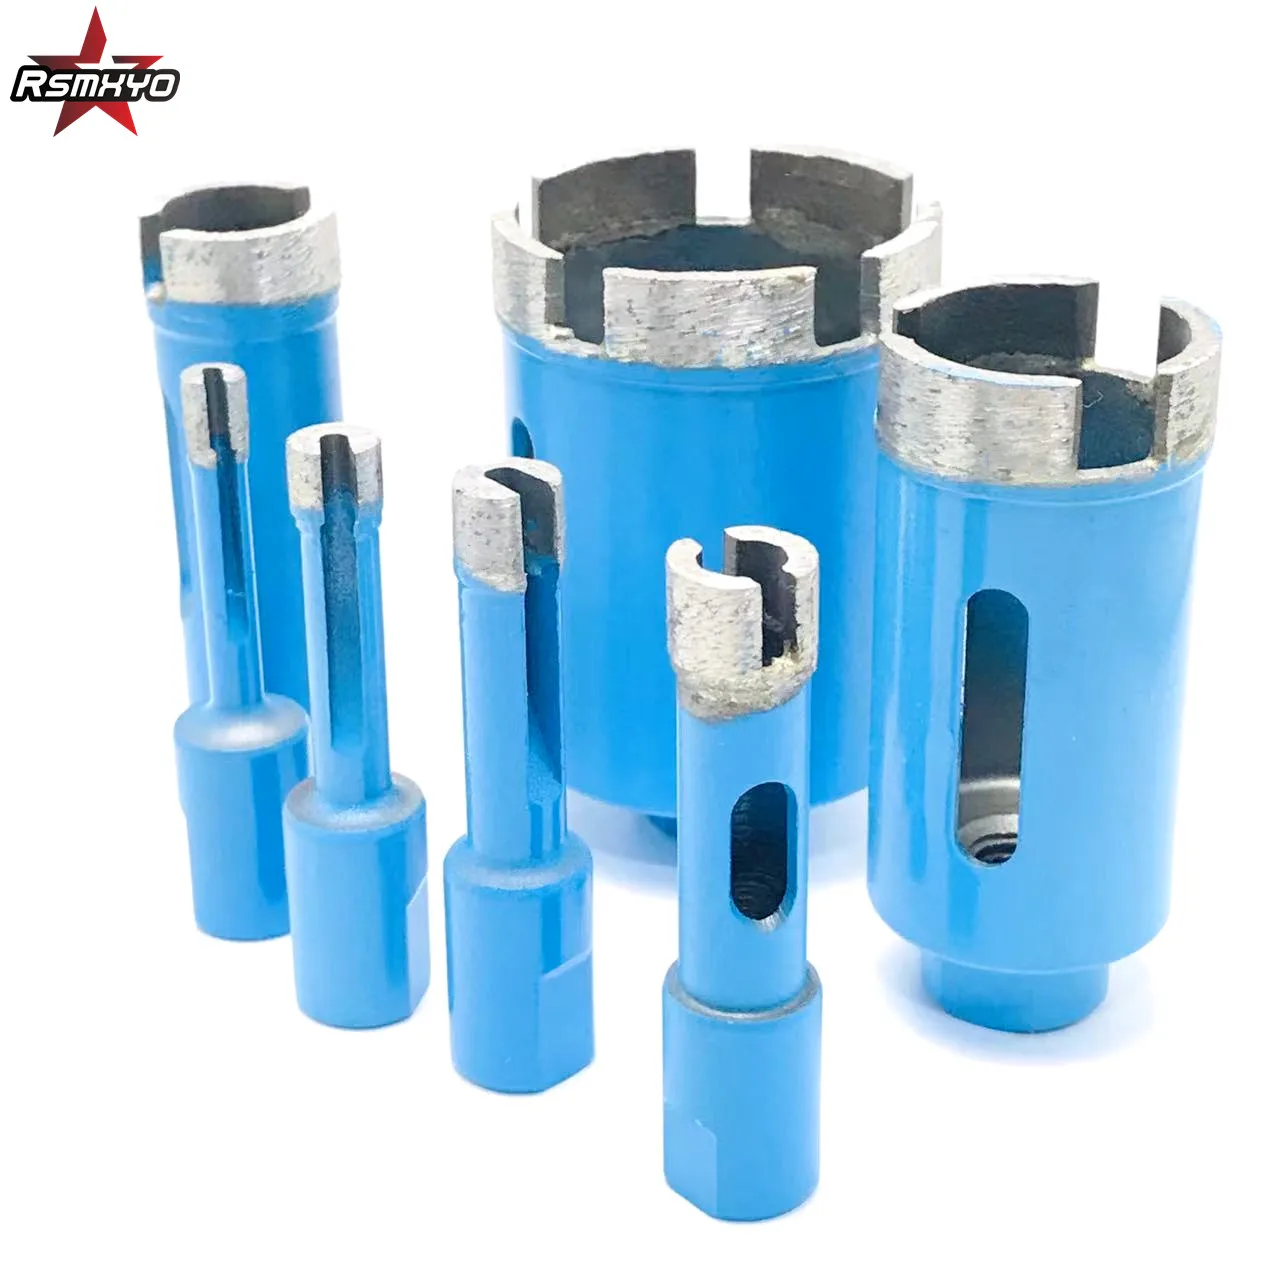 1pcs 6-75mm Diamond Drill Cutter Saw Core Drill Bit M10 Angle Grinder Hole Opener For Marble Granite Brick Tile Ceramic Concrete m10 angle grinder 6 75mm blue diamond drill cutter saw core drill bit hole opener for marble granite brick tile ceramic concrete